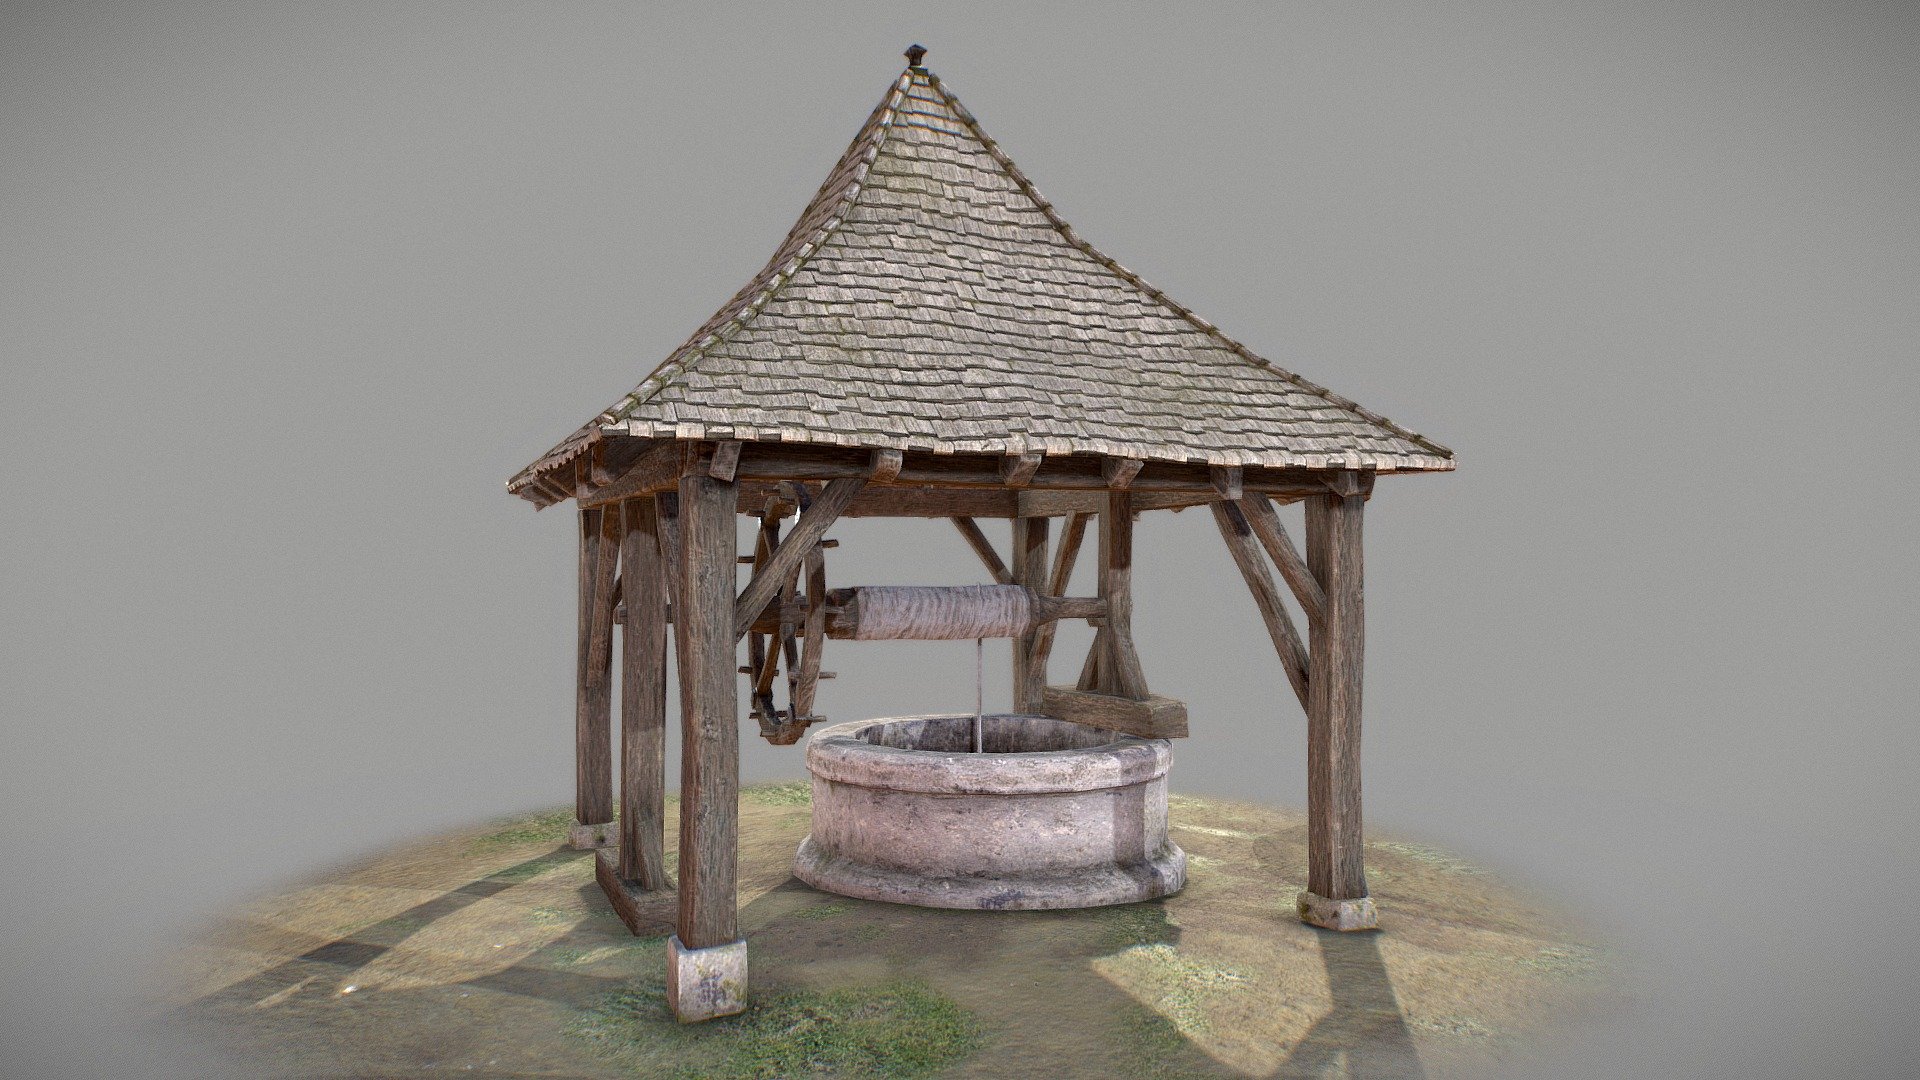 Puits Medieval / Medieval Well

Model created in early 2017 for a realtime VR/AR project (Rocher de Carlat, Cantal (15), France)

Rocher de Carlat, la forteresse en 3D

3DSMax, ZBrush, Quixel DDo - Puits Medieval / Medieval Well - 3D model by Nicolas Cayré (@nicolas.cayre) 3d model